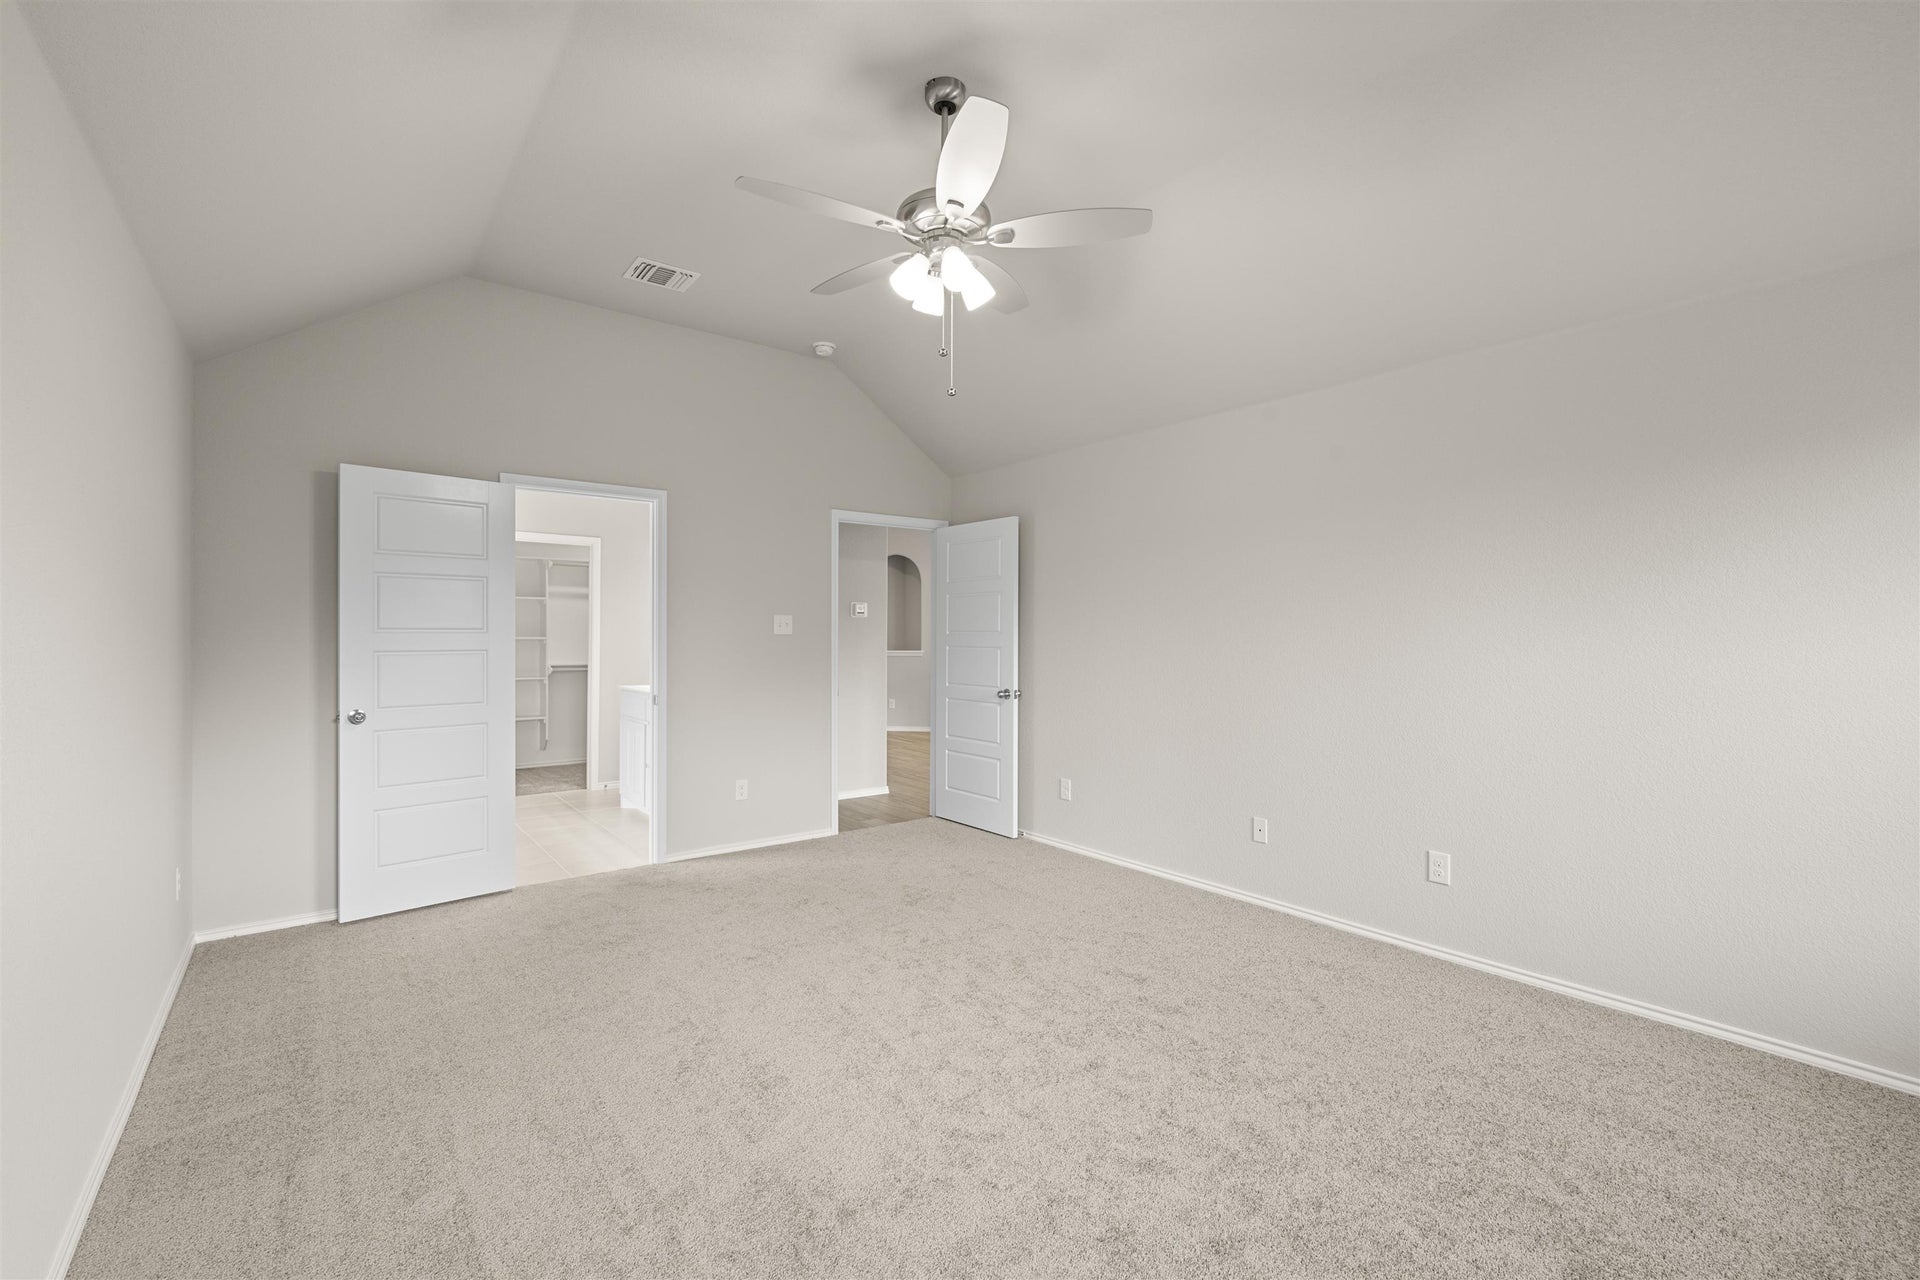 3br New Home in Crowley, TX